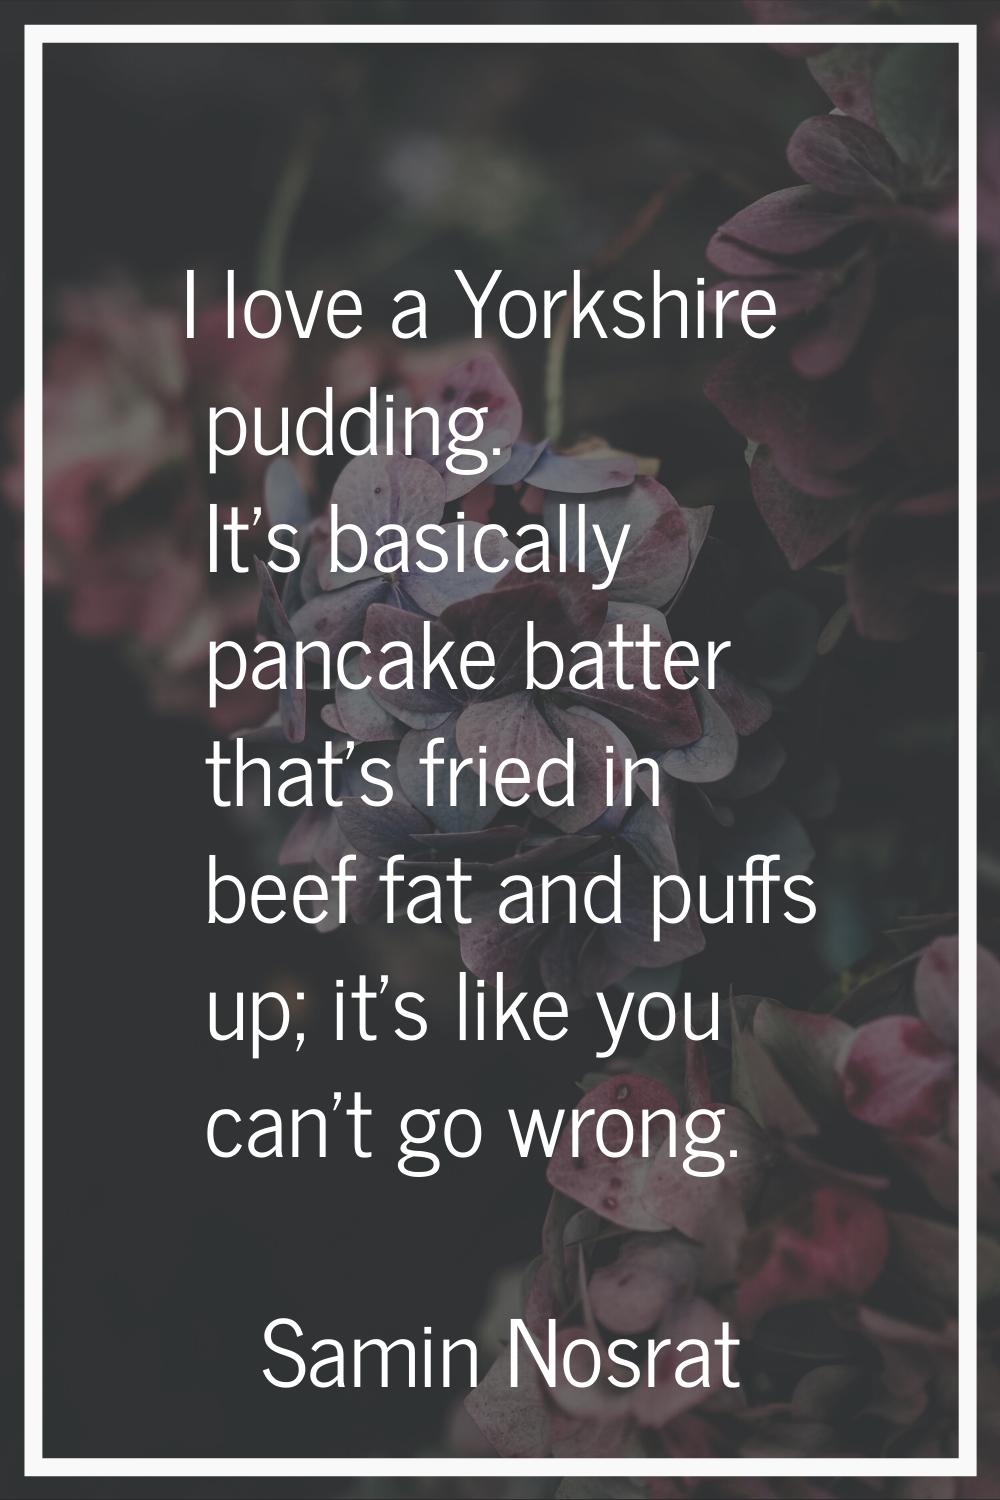 I love a Yorkshire pudding. It's basically pancake batter that's fried in beef fat and puffs up; it